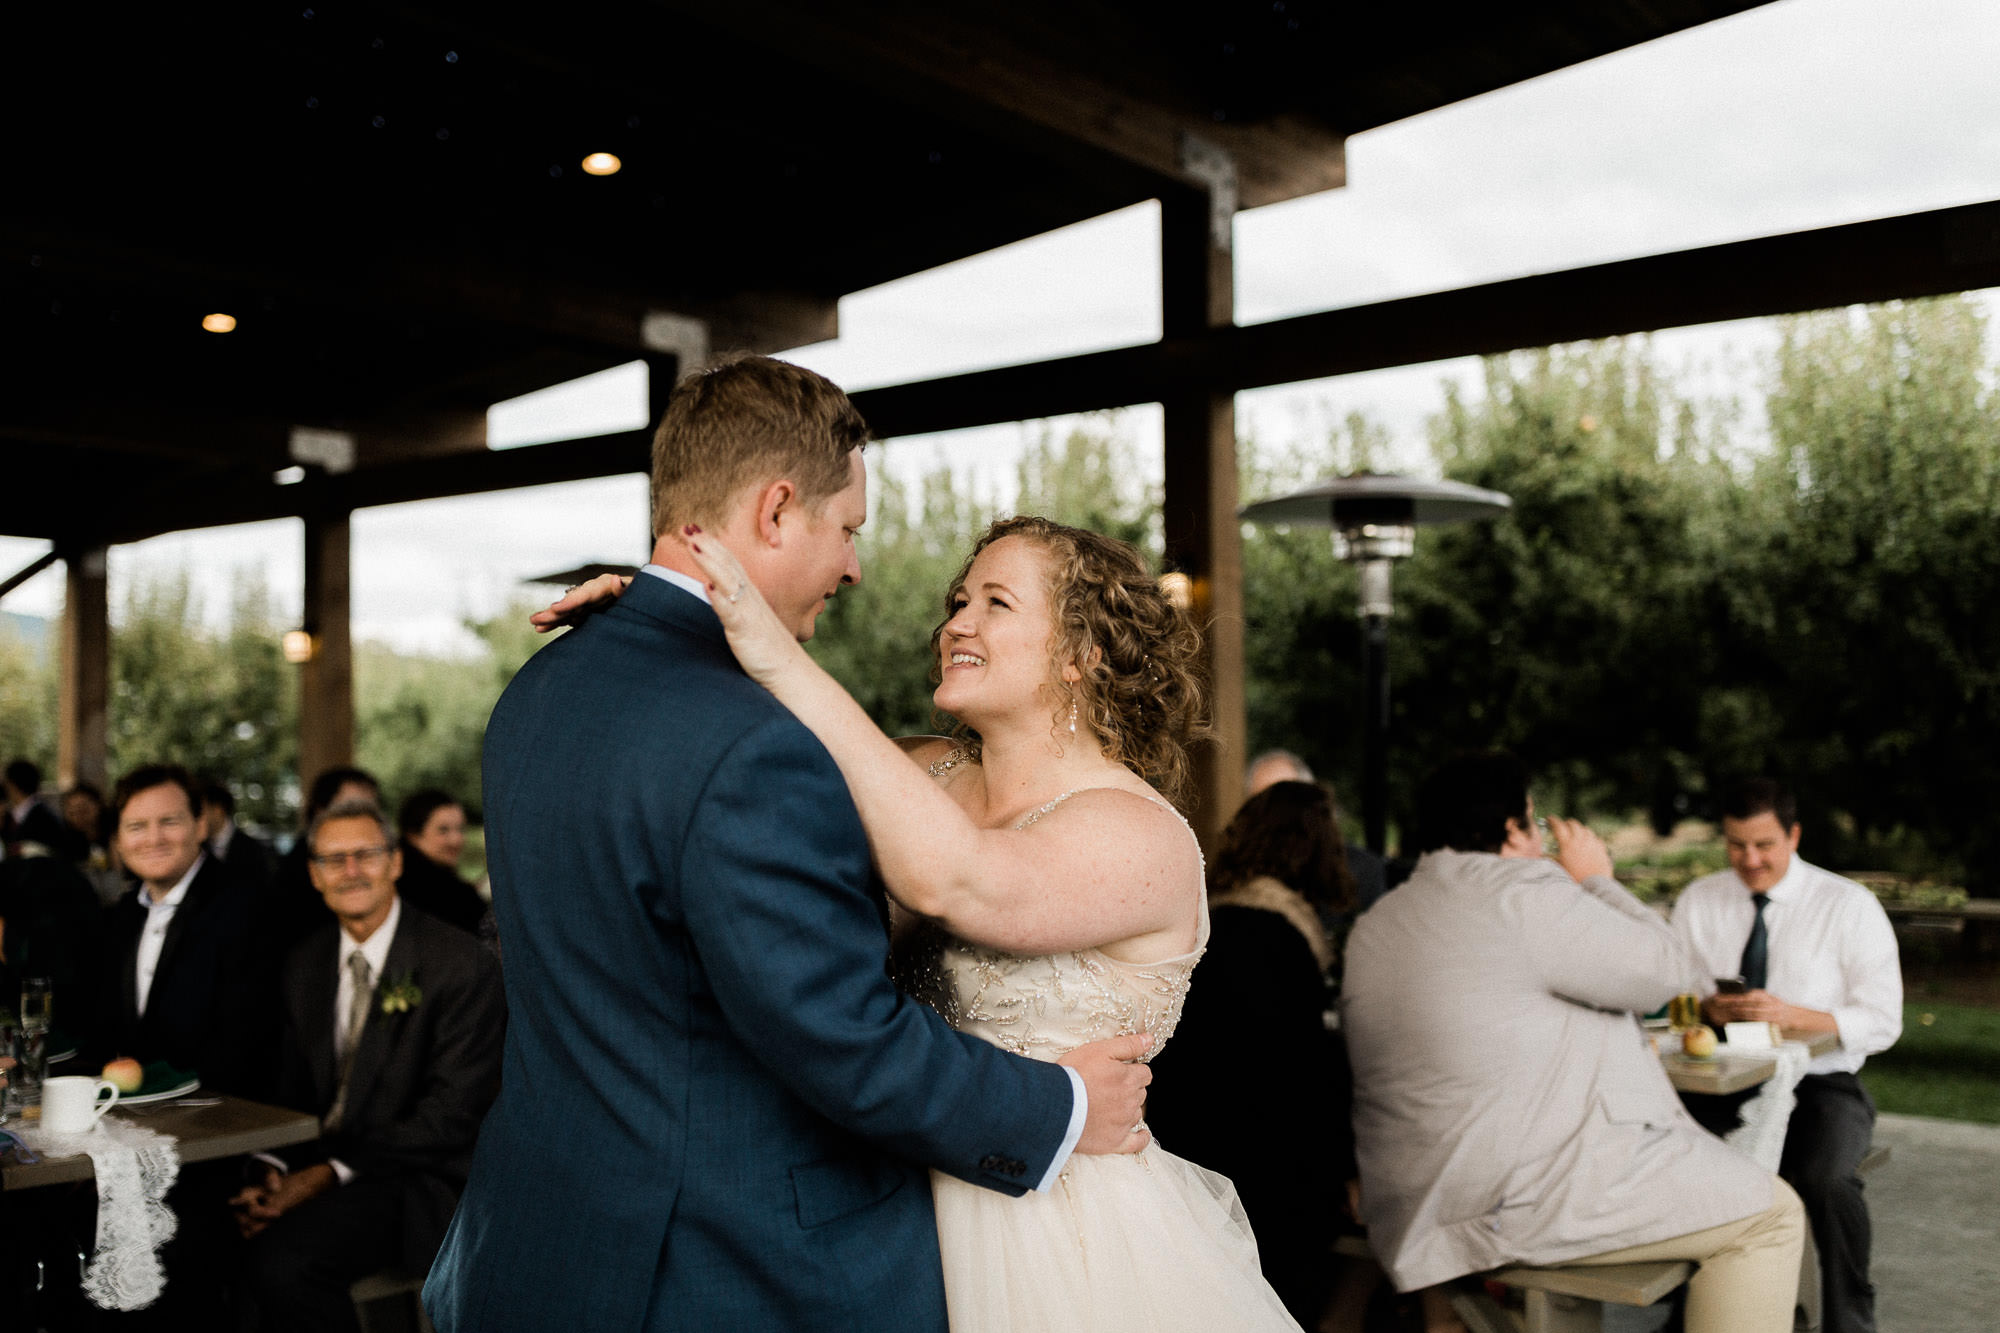 The bride and groom share their first dance at Mt. View Orchards.